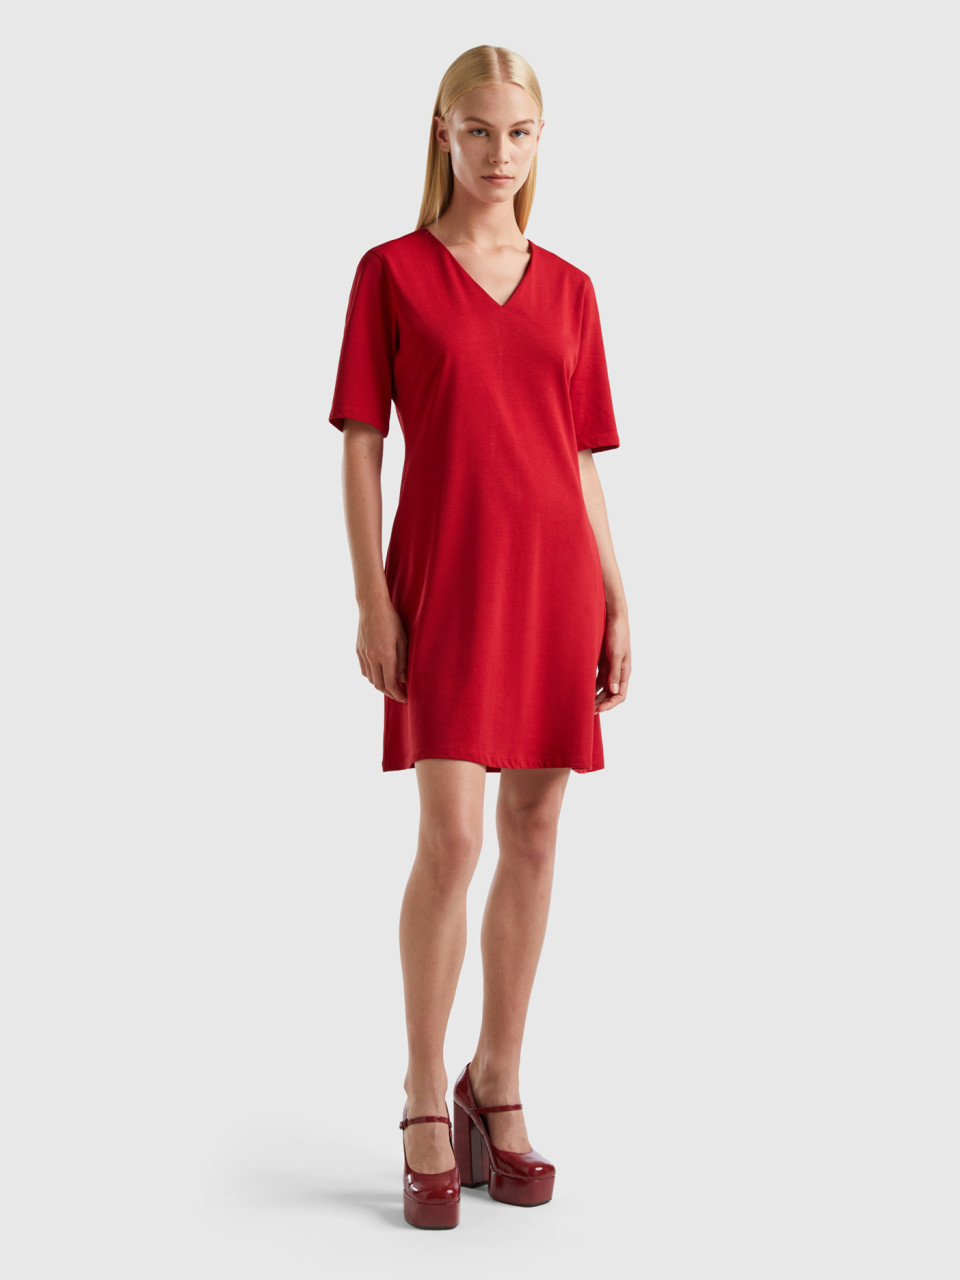 Benetton, V-neck Dress In Pure Cotton, Red, Women